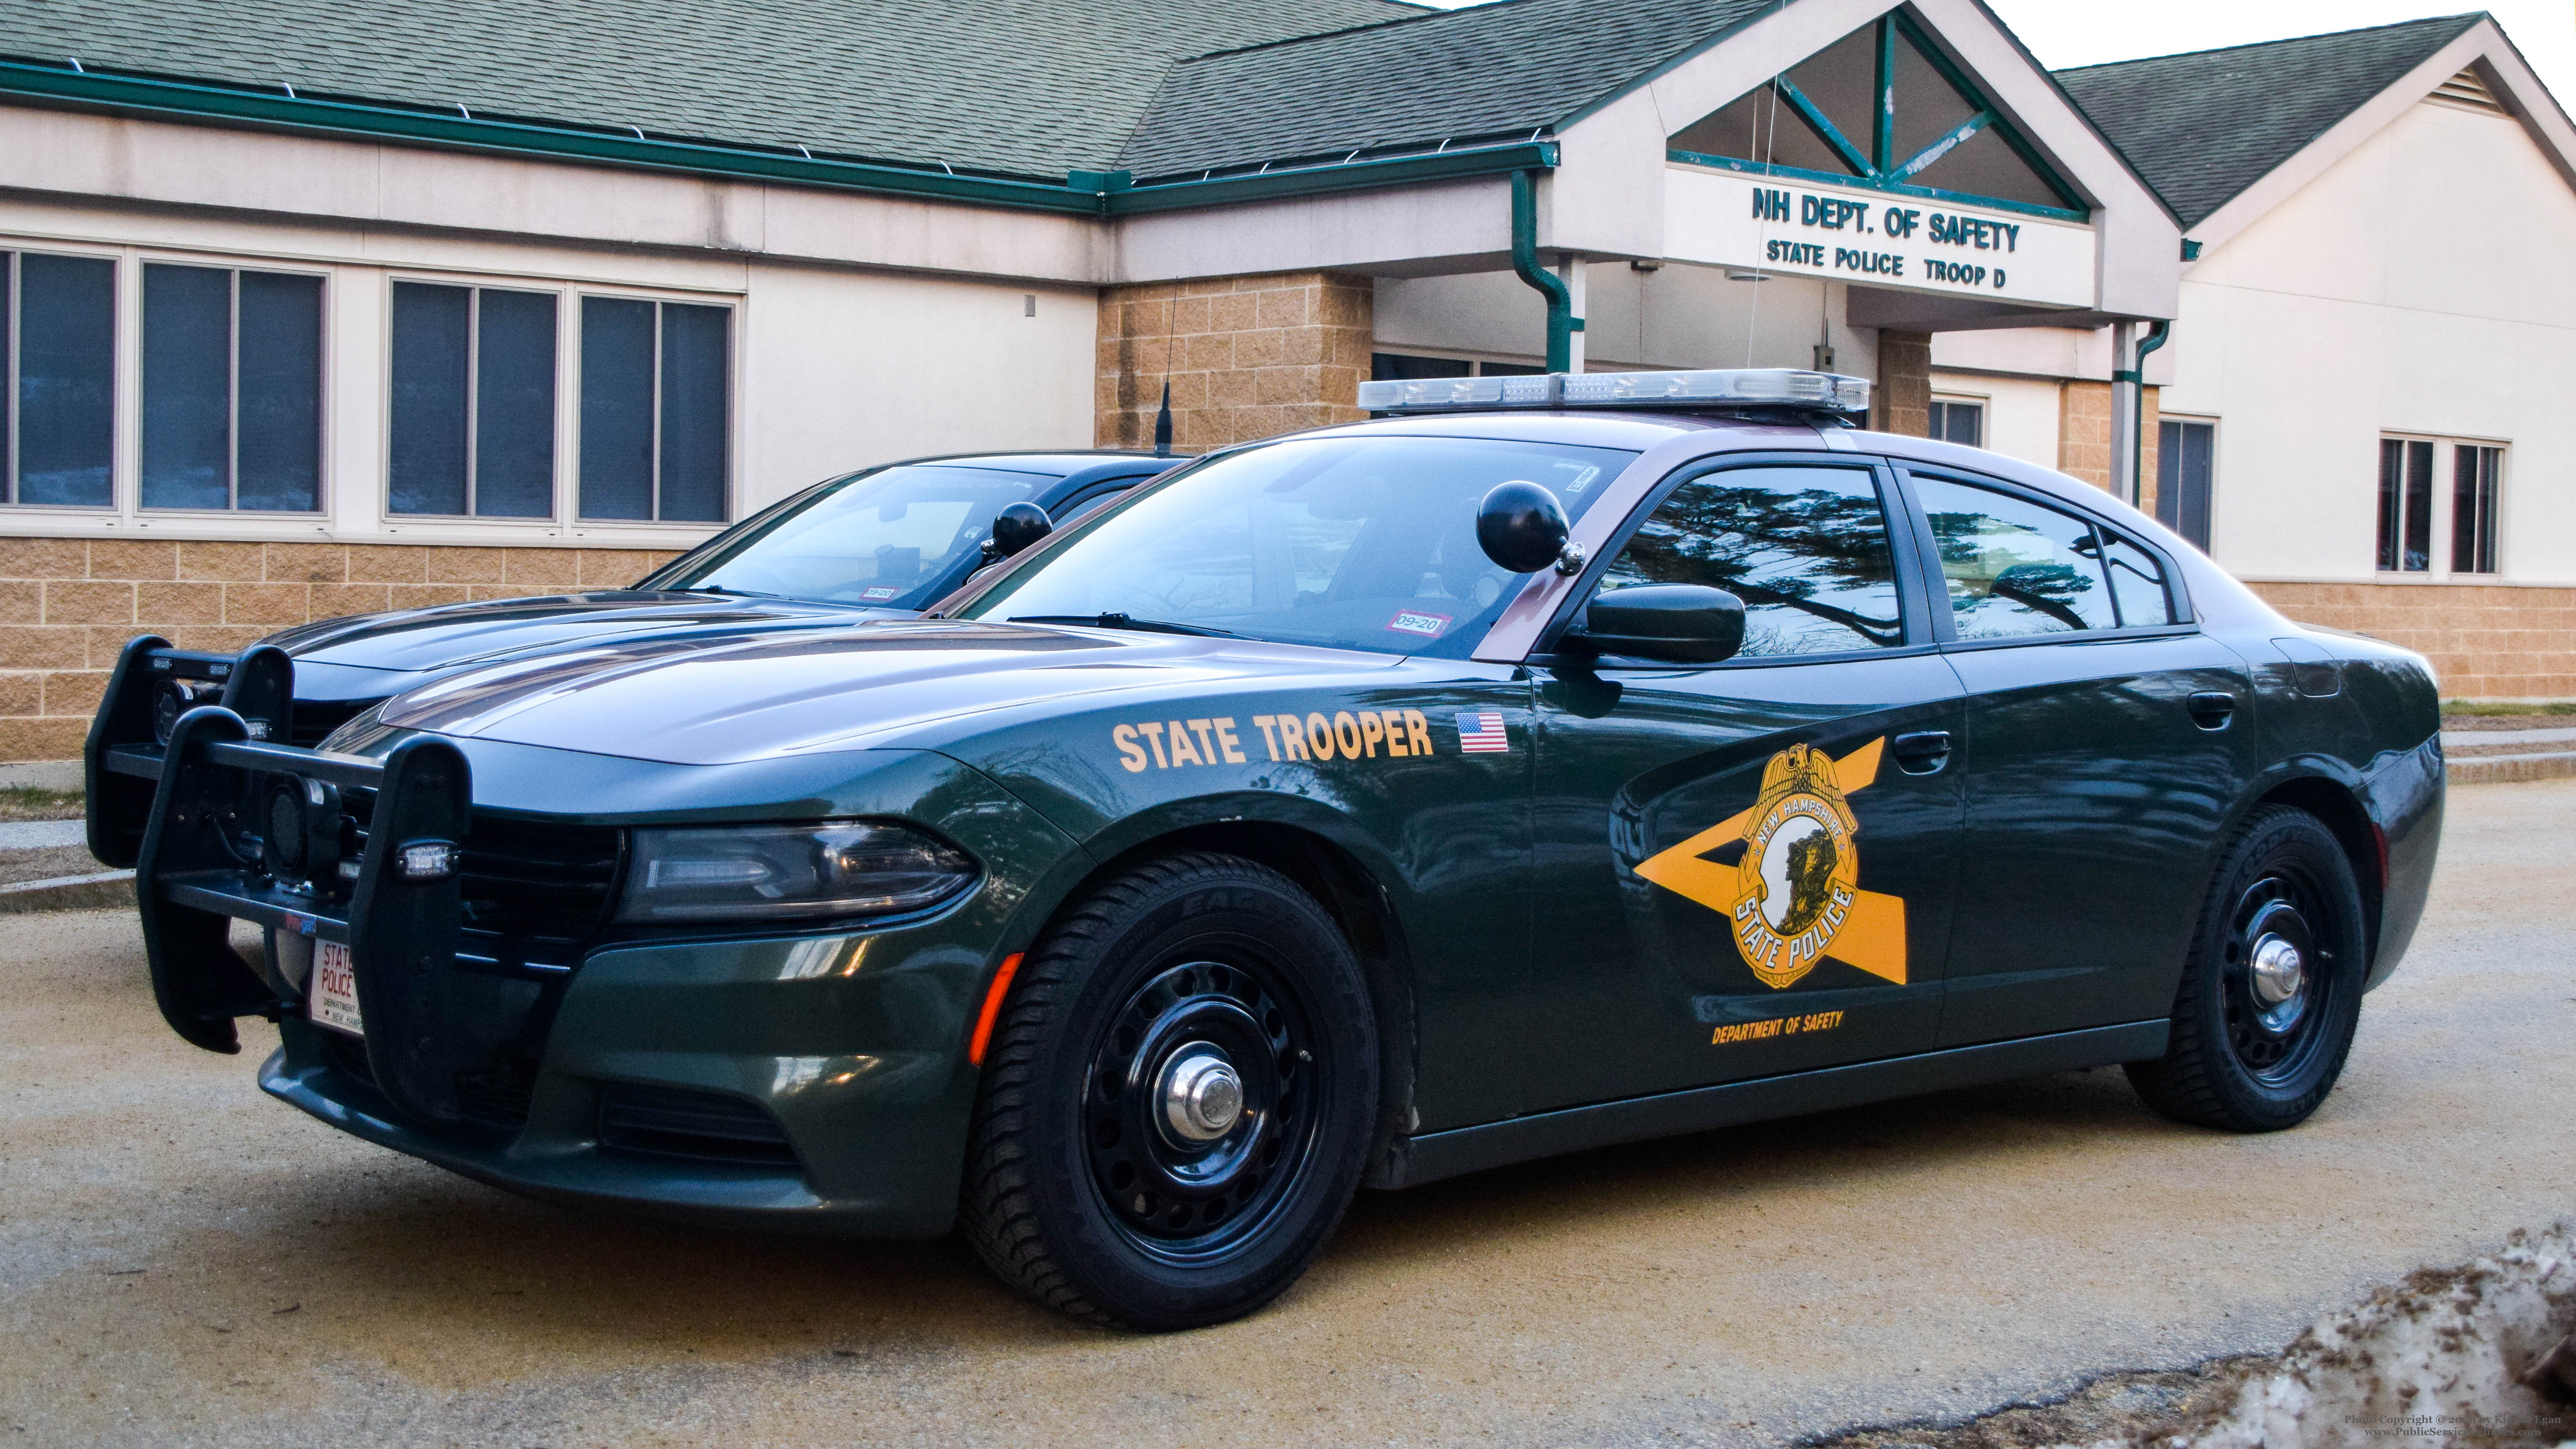 A photo  of New Hampshire State Police
            Cruiser 410, a 2015-2019 Dodge Charger             taken by Kieran Egan